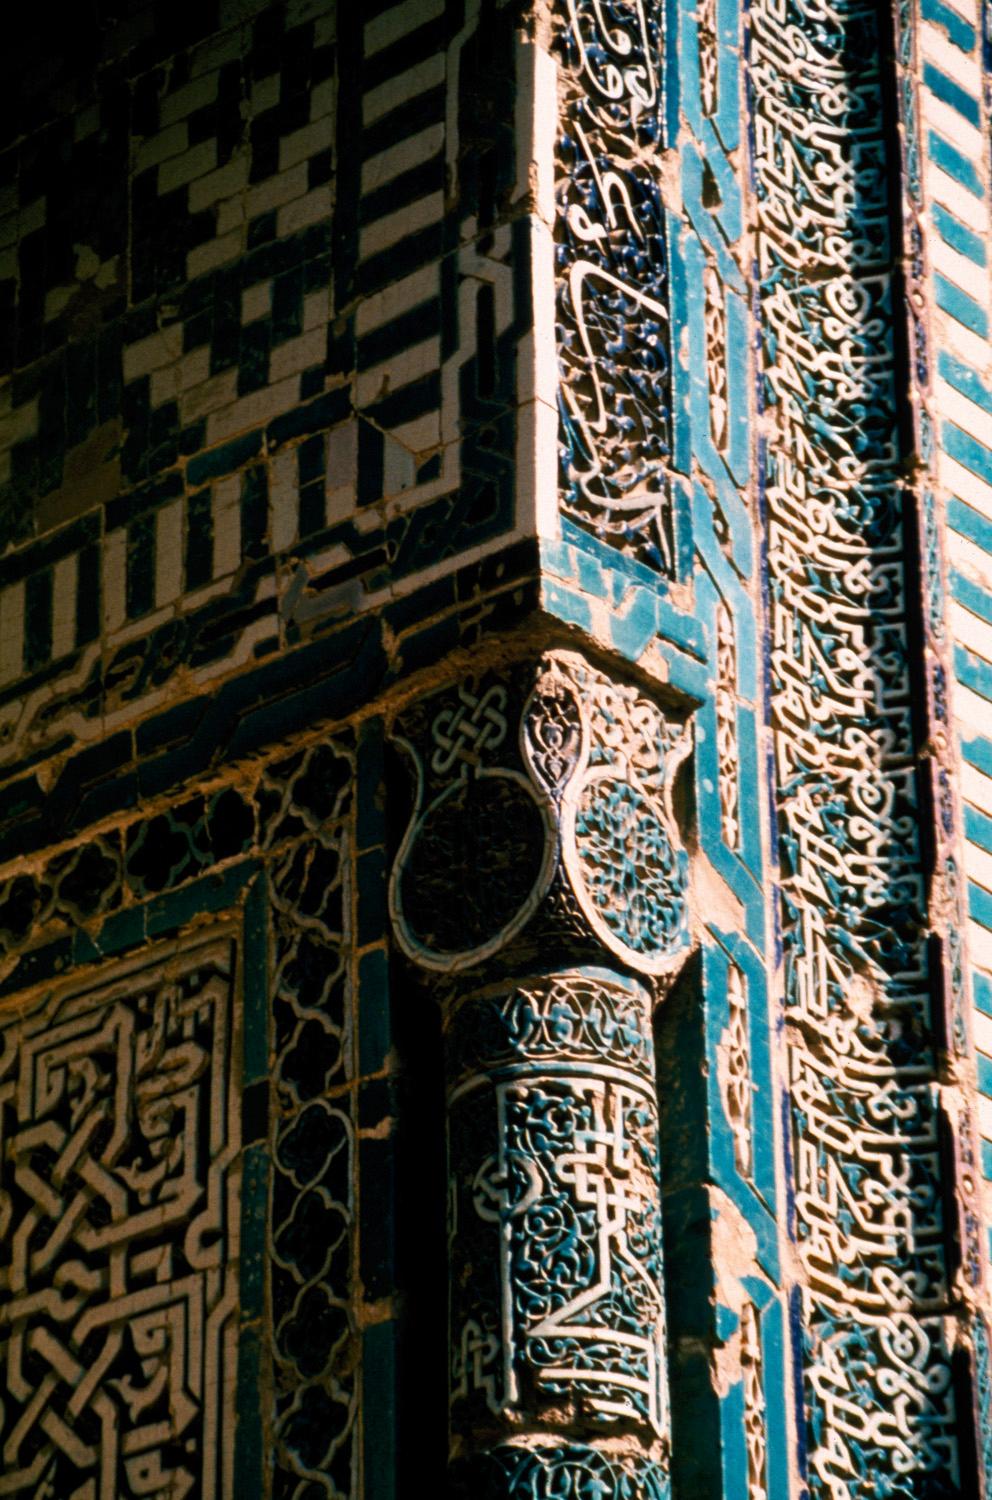 Khwaja Ahmed Mausoleum - Exterior detail of portal niche showing mosaic decoration of wall and embedded column